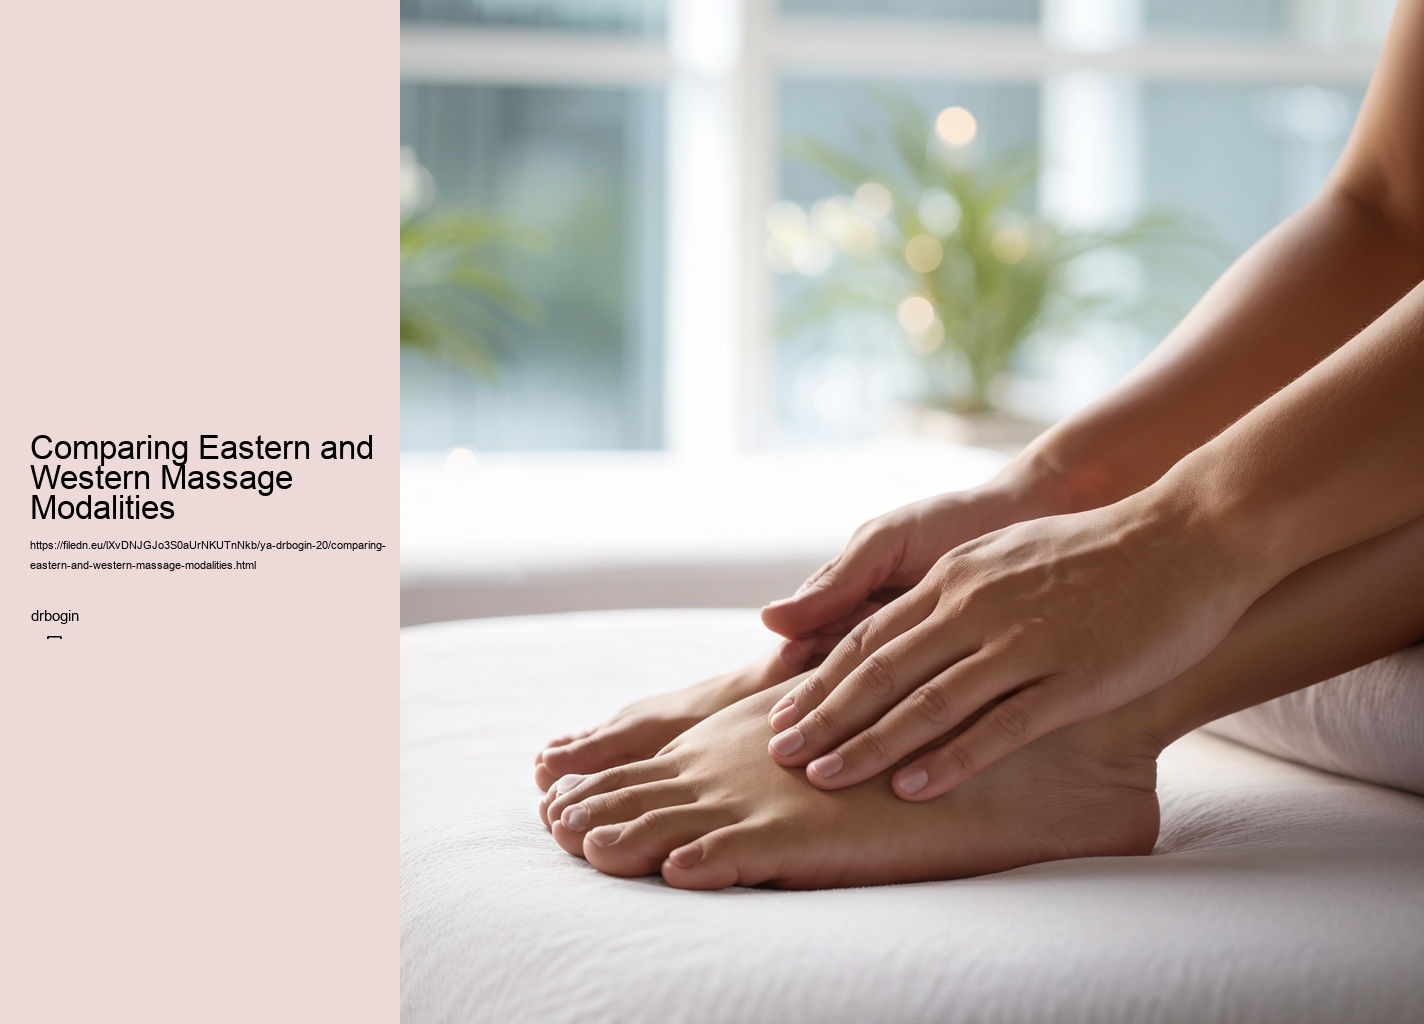 Comparing Eastern and Western Massage Modalities